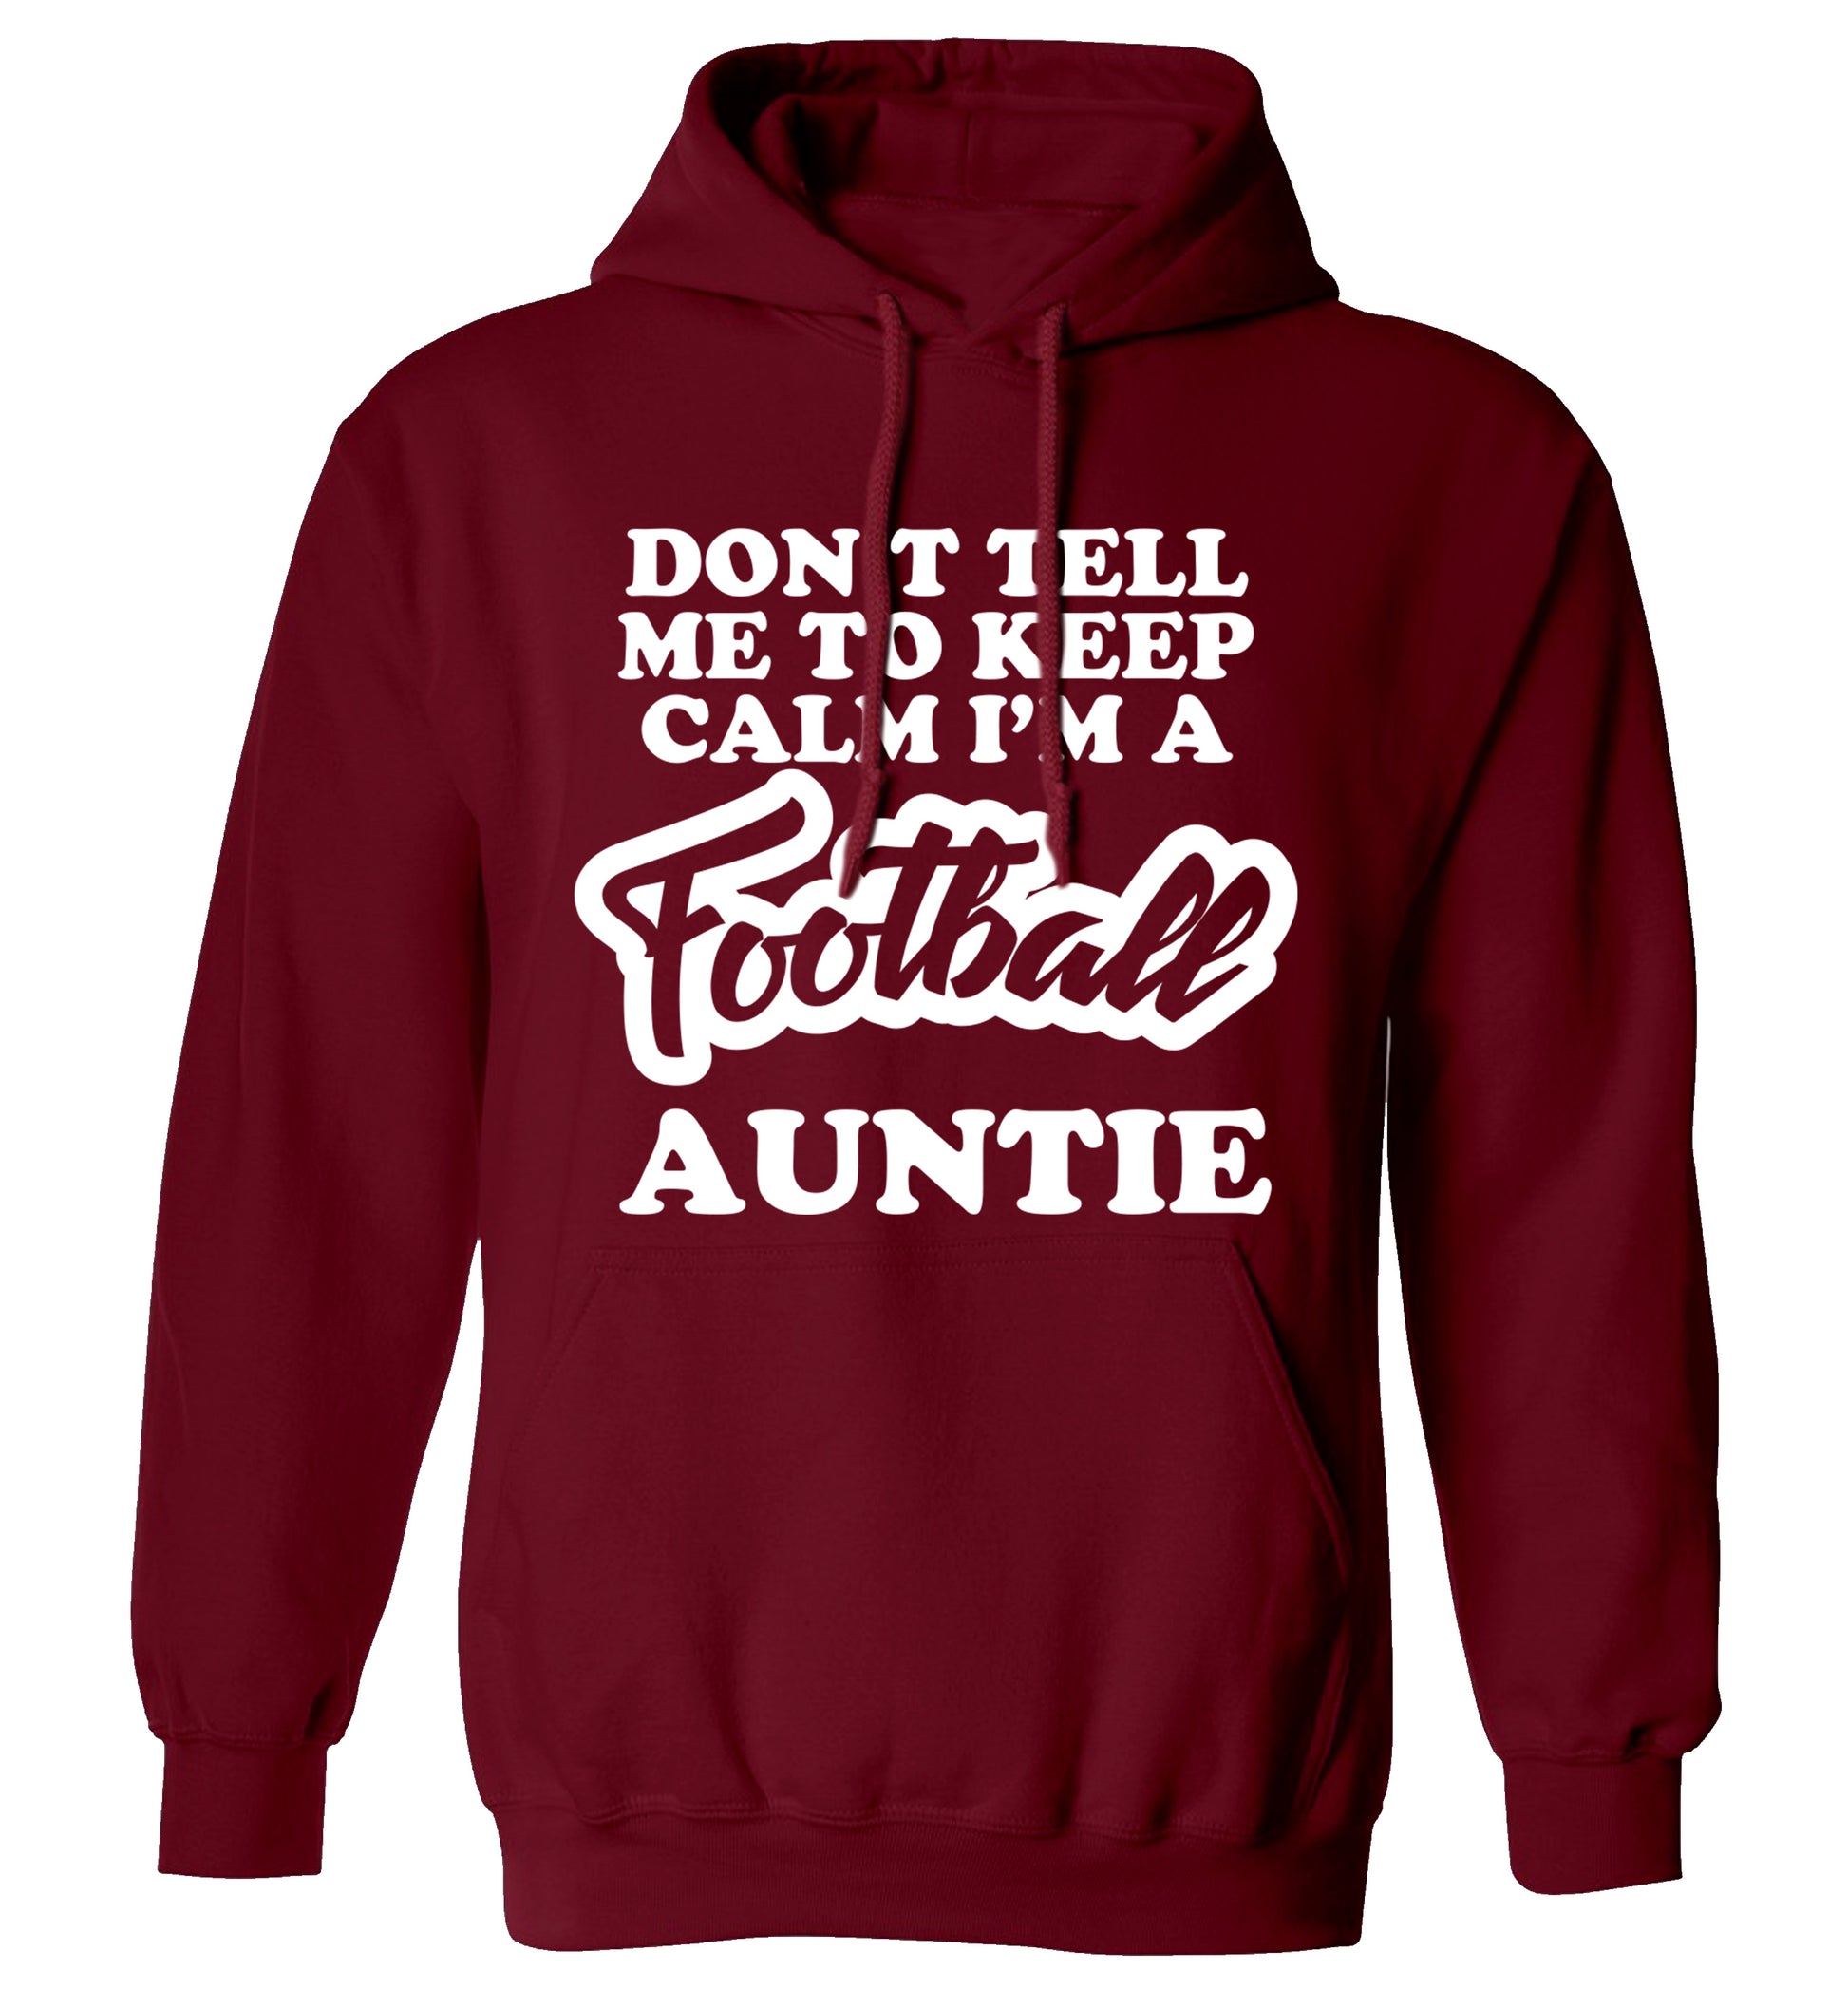 Don't tell me to keep calm I'm a football auntie adults unisexmaroon hoodie 2XL